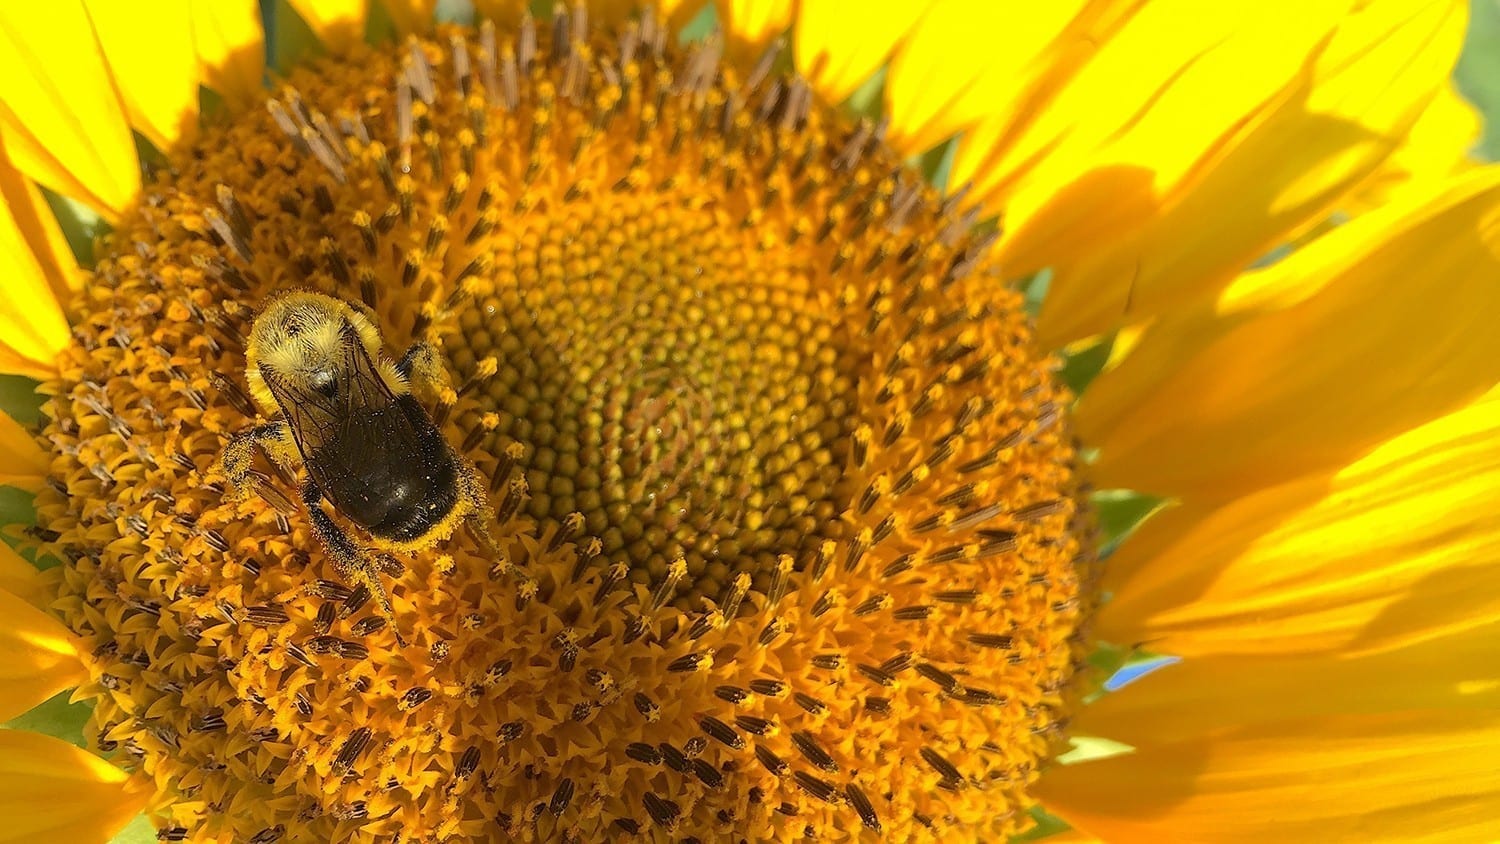 Could sunflower pollen dramatically lower rates of infection in bees by specific pathogens